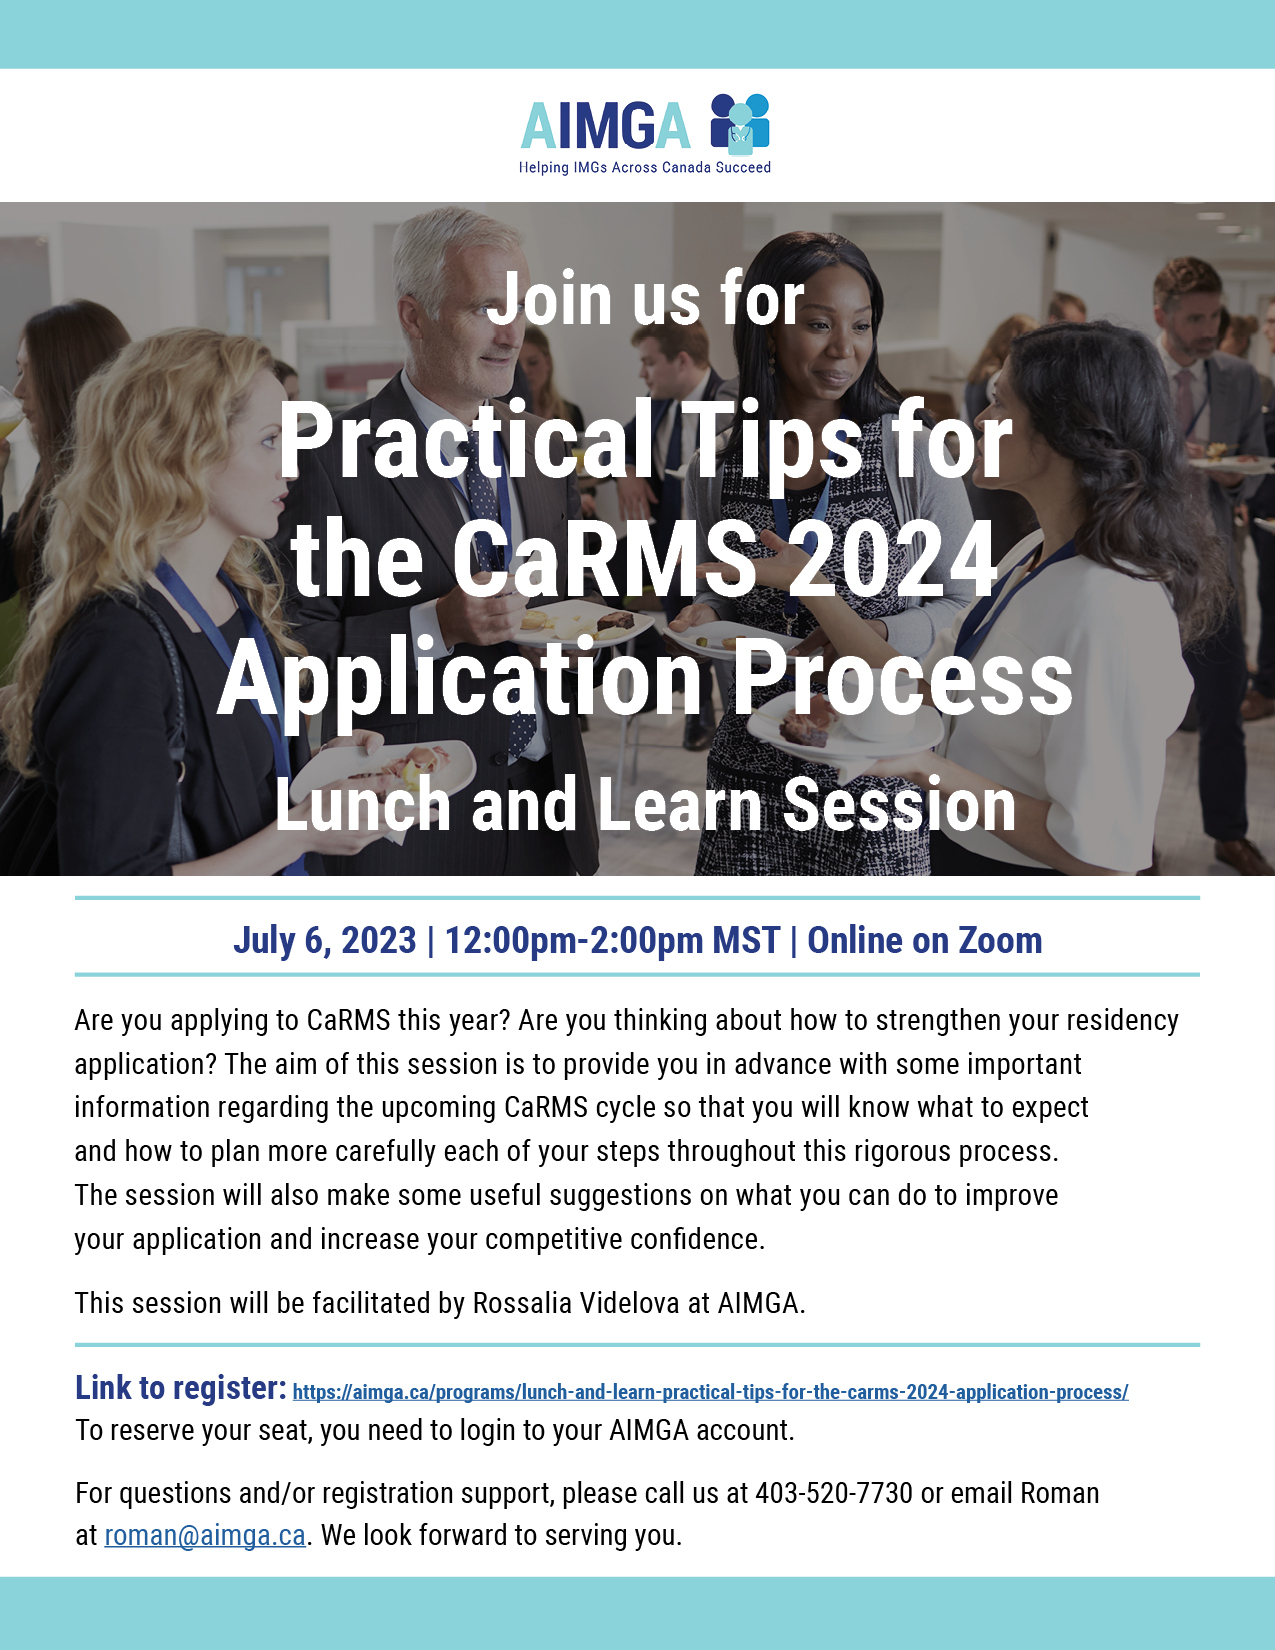 Lunch and Learn Practical Tips for the CaRMS 2024 Application Process